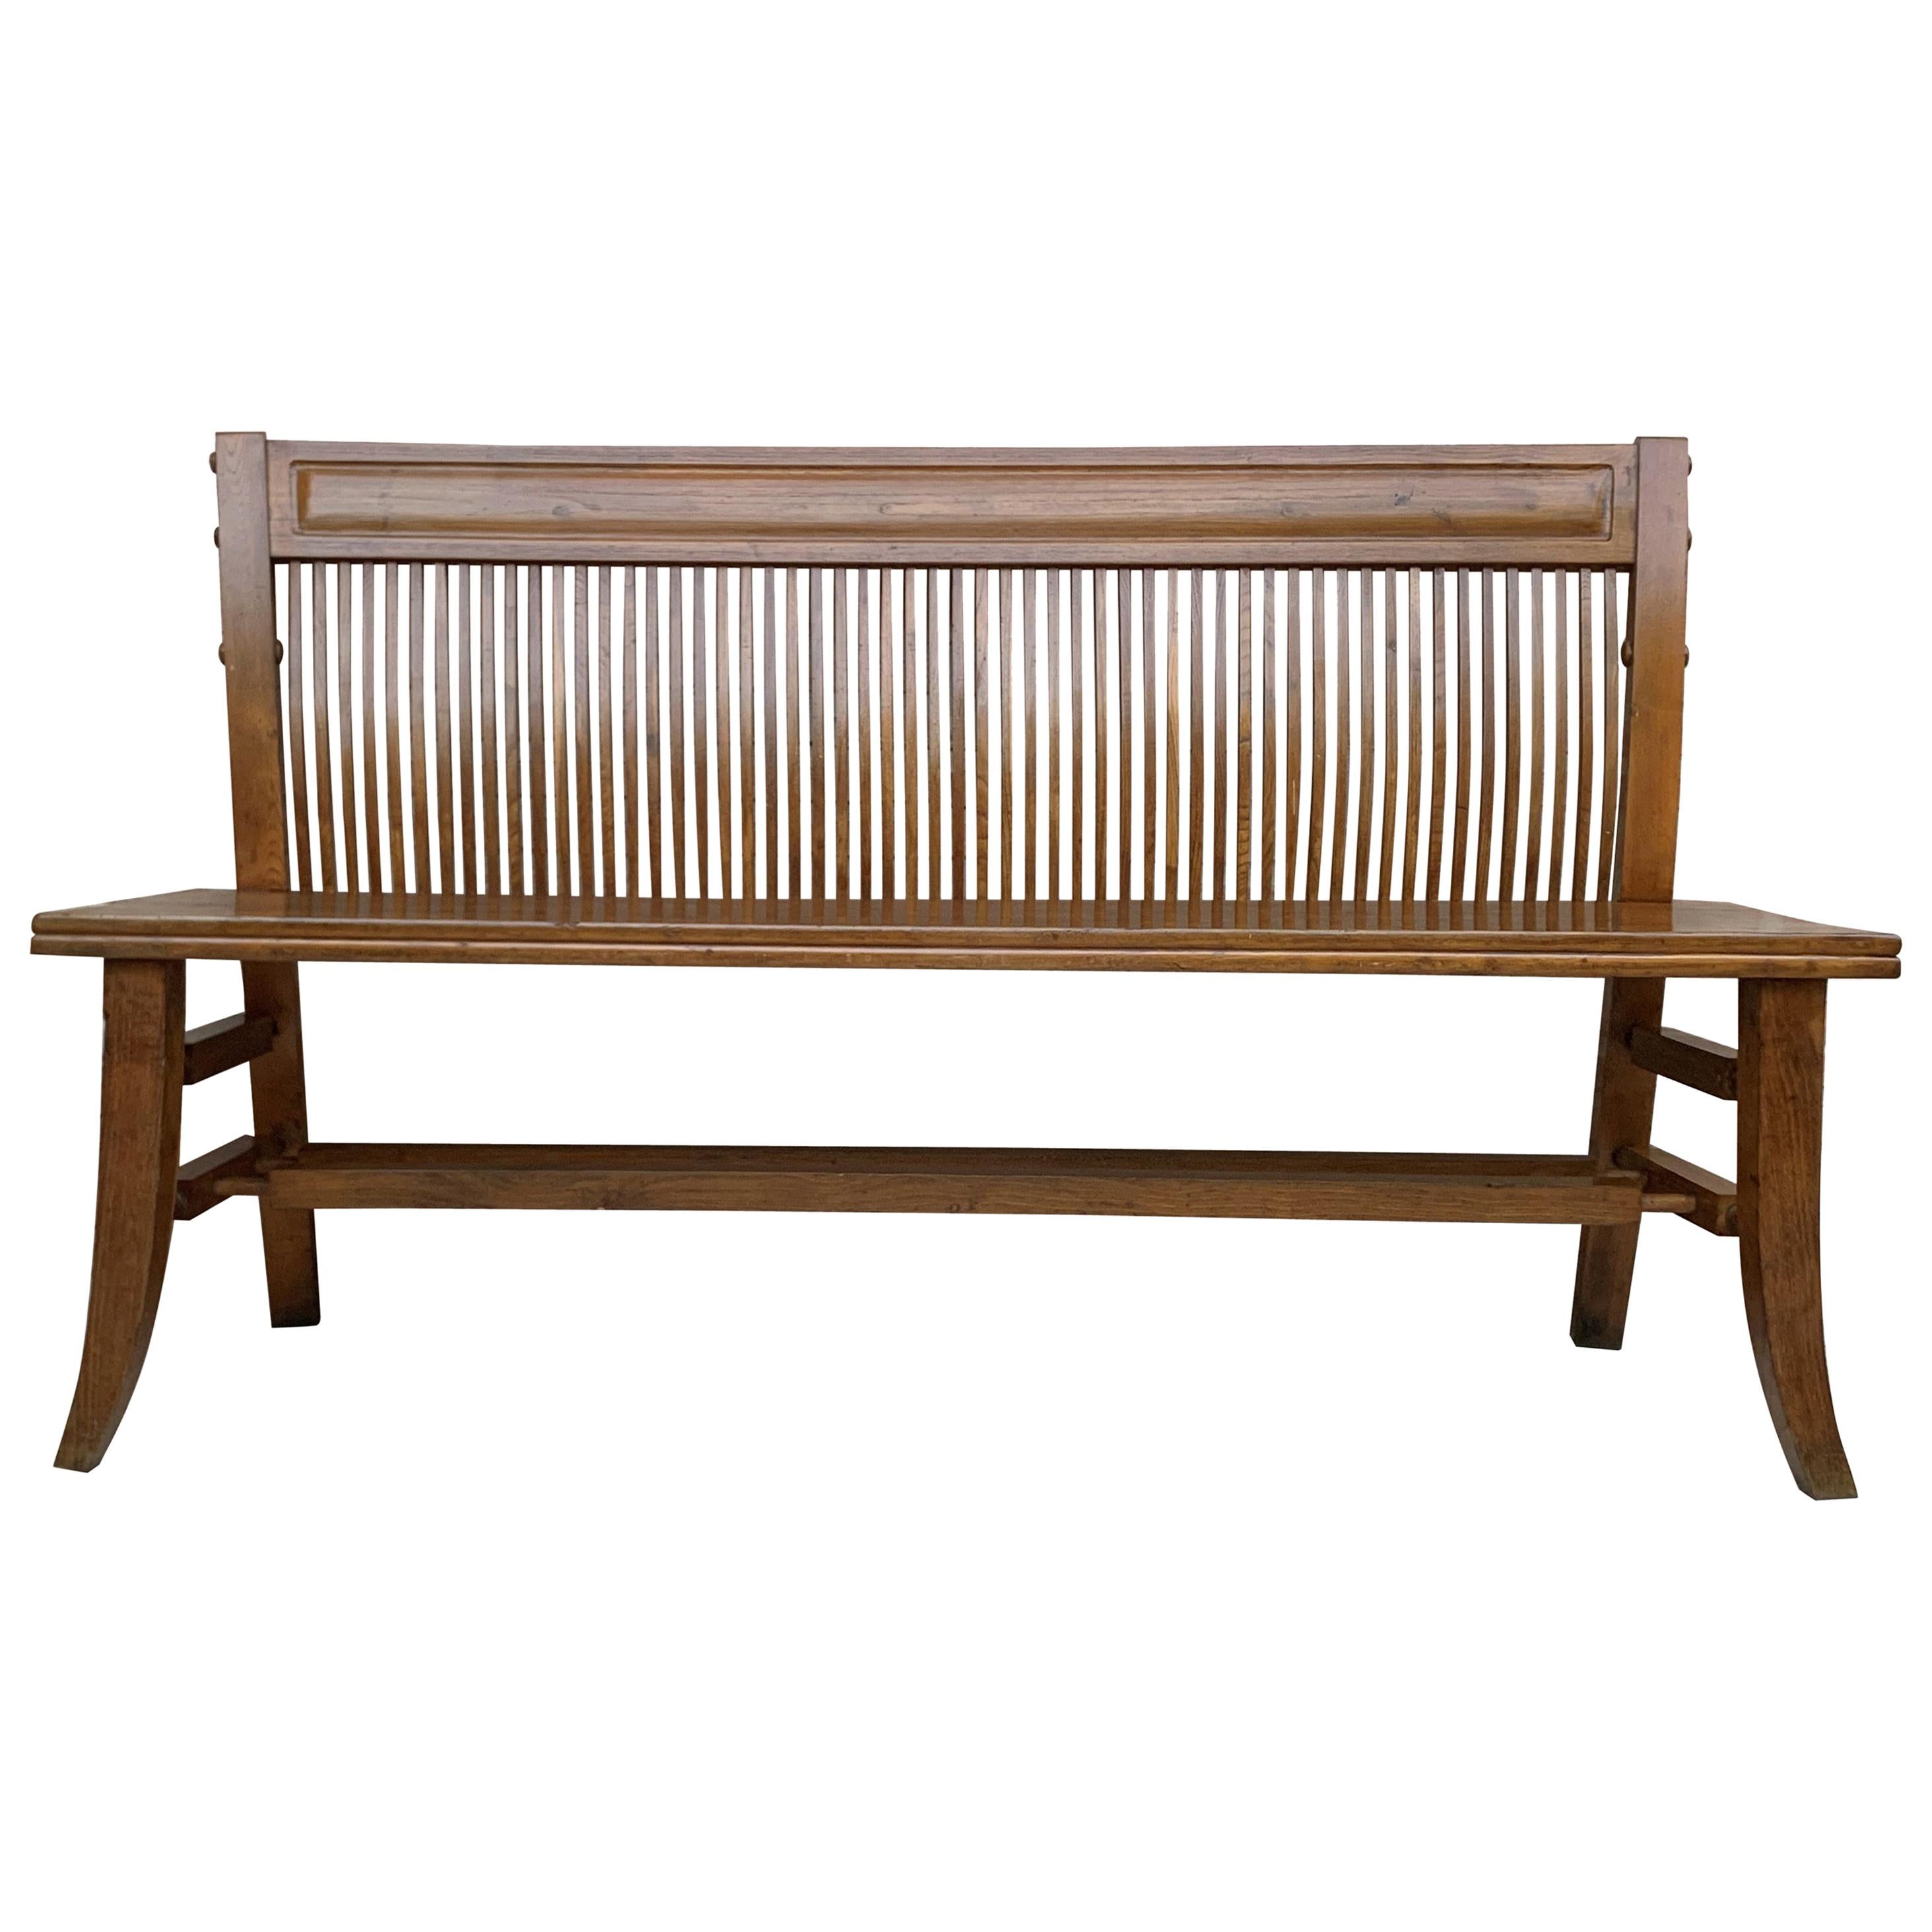 Mid-20th Century Modern Bench in Walnut with Bars Back and Wood Seat